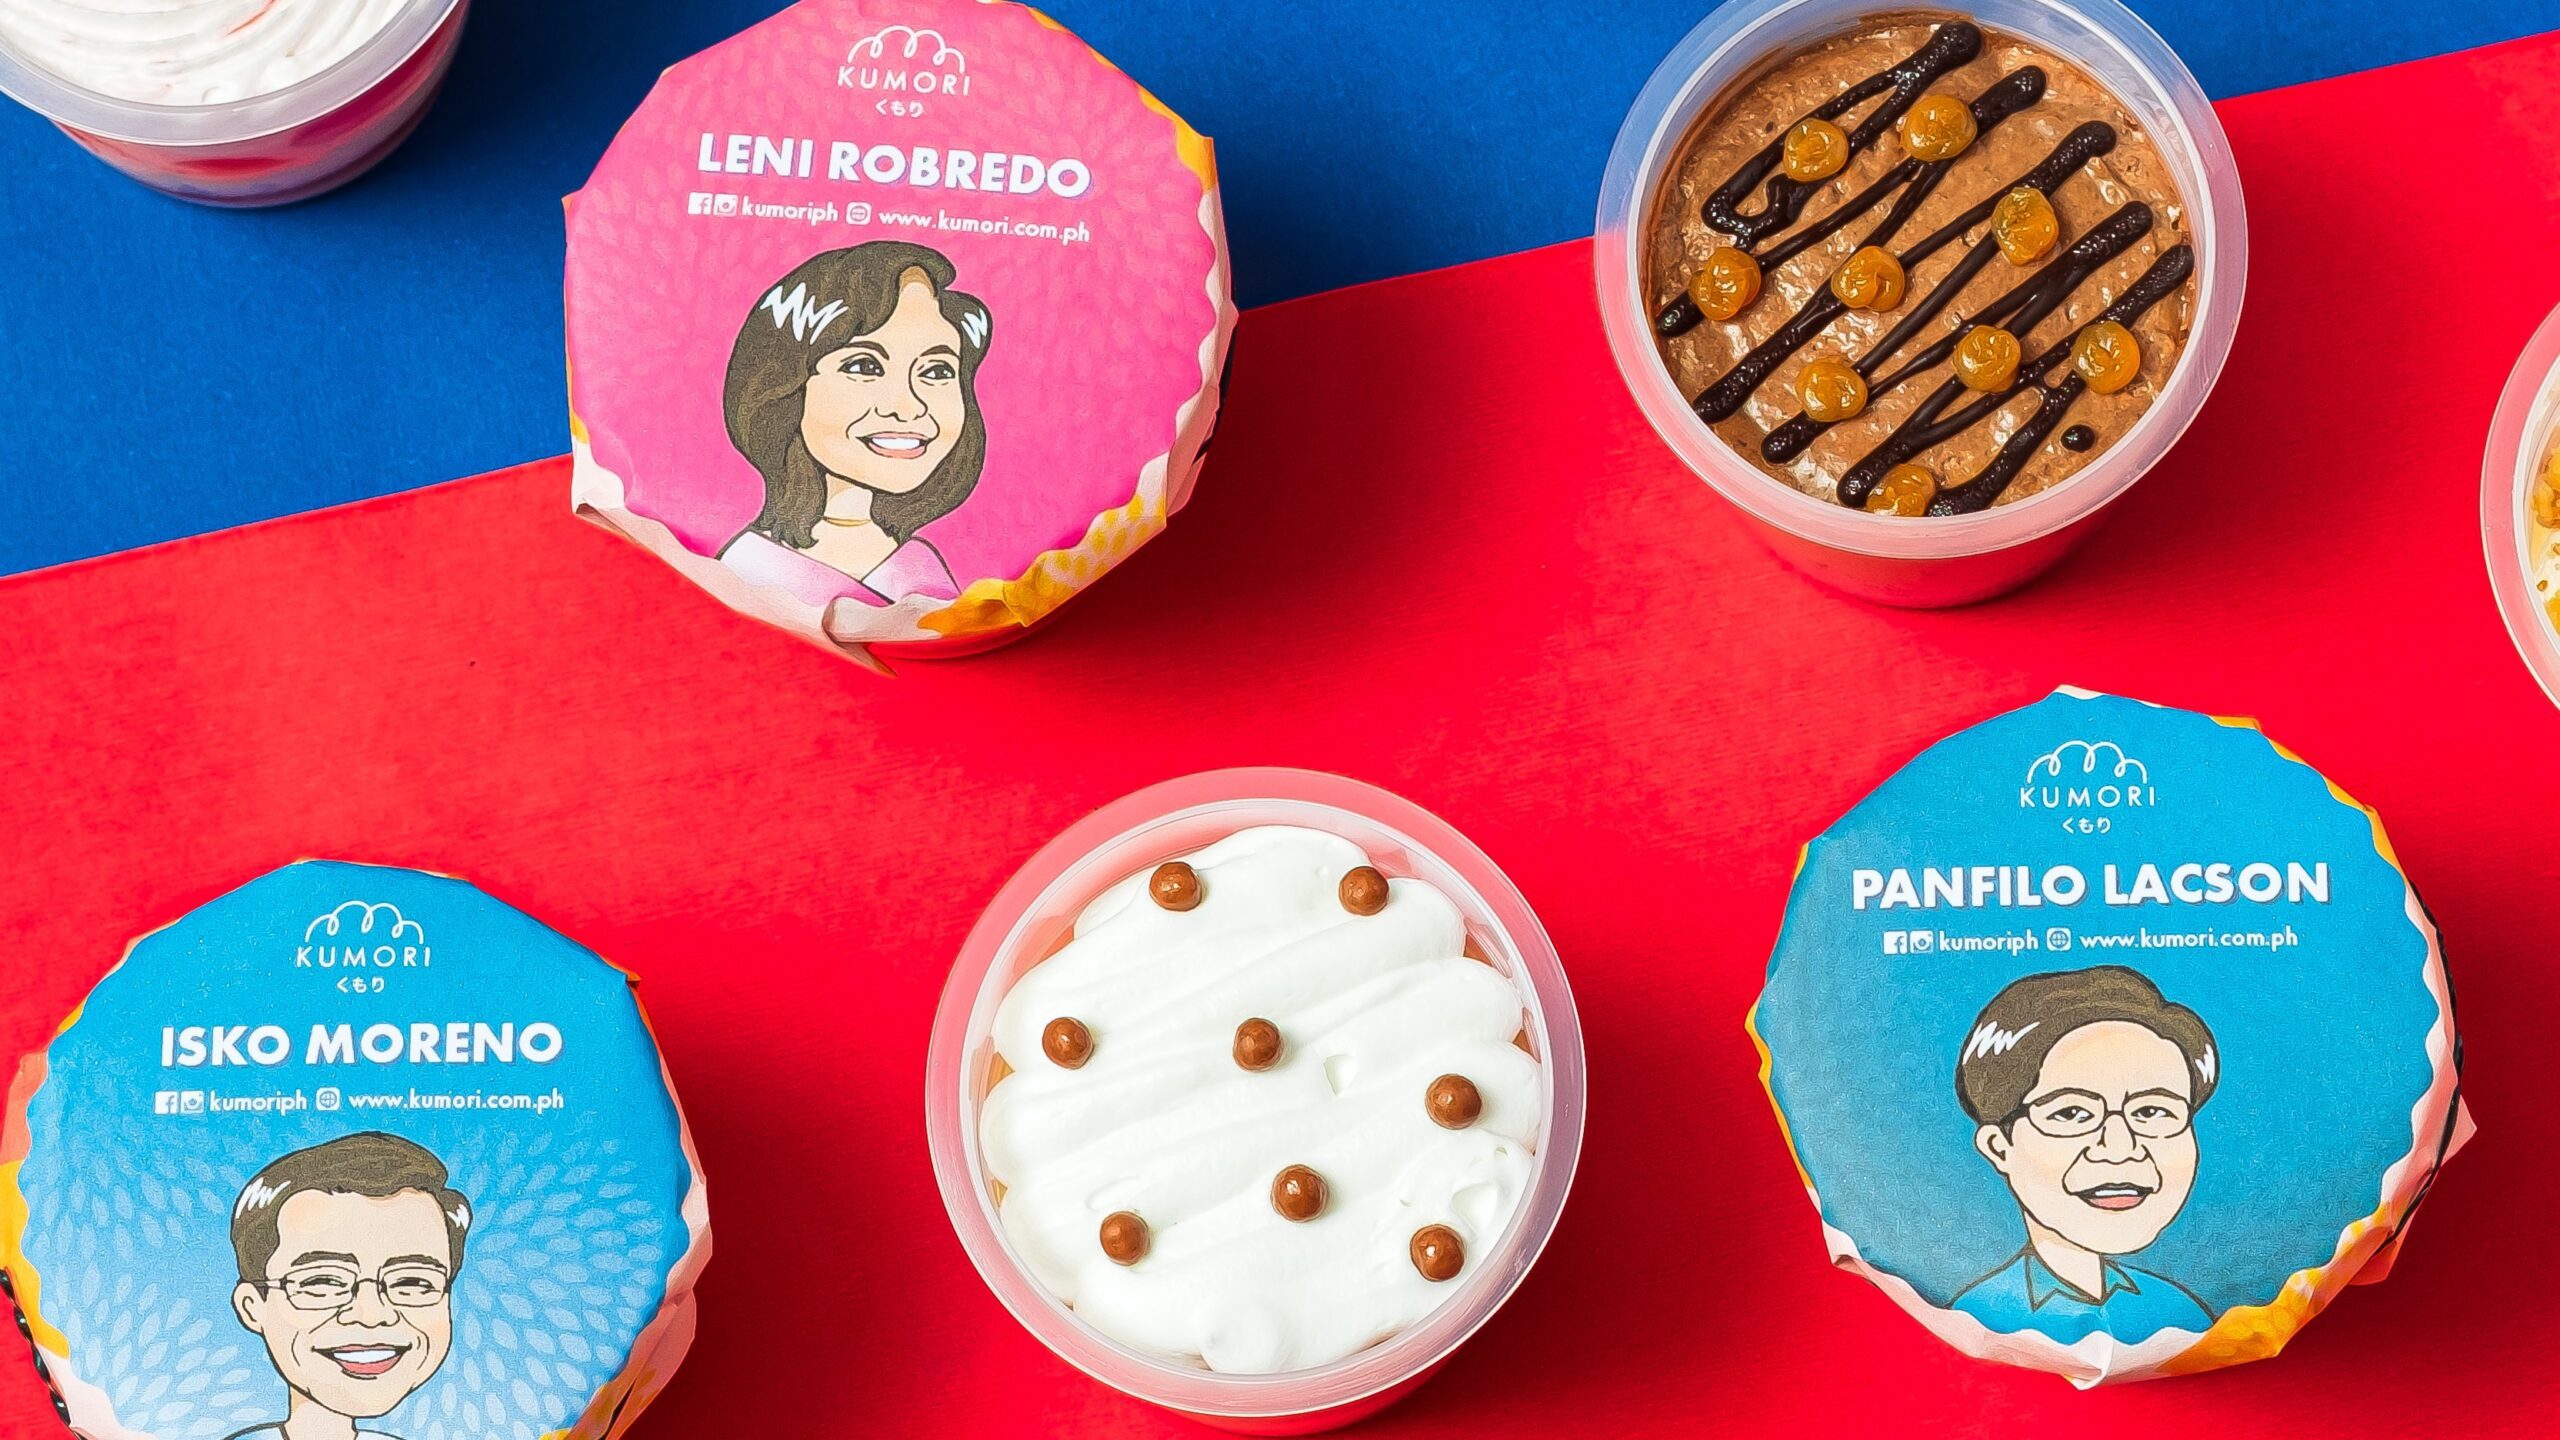 Pick your president! Kumori’s cake cups come in 5 ‘presidential’ designs